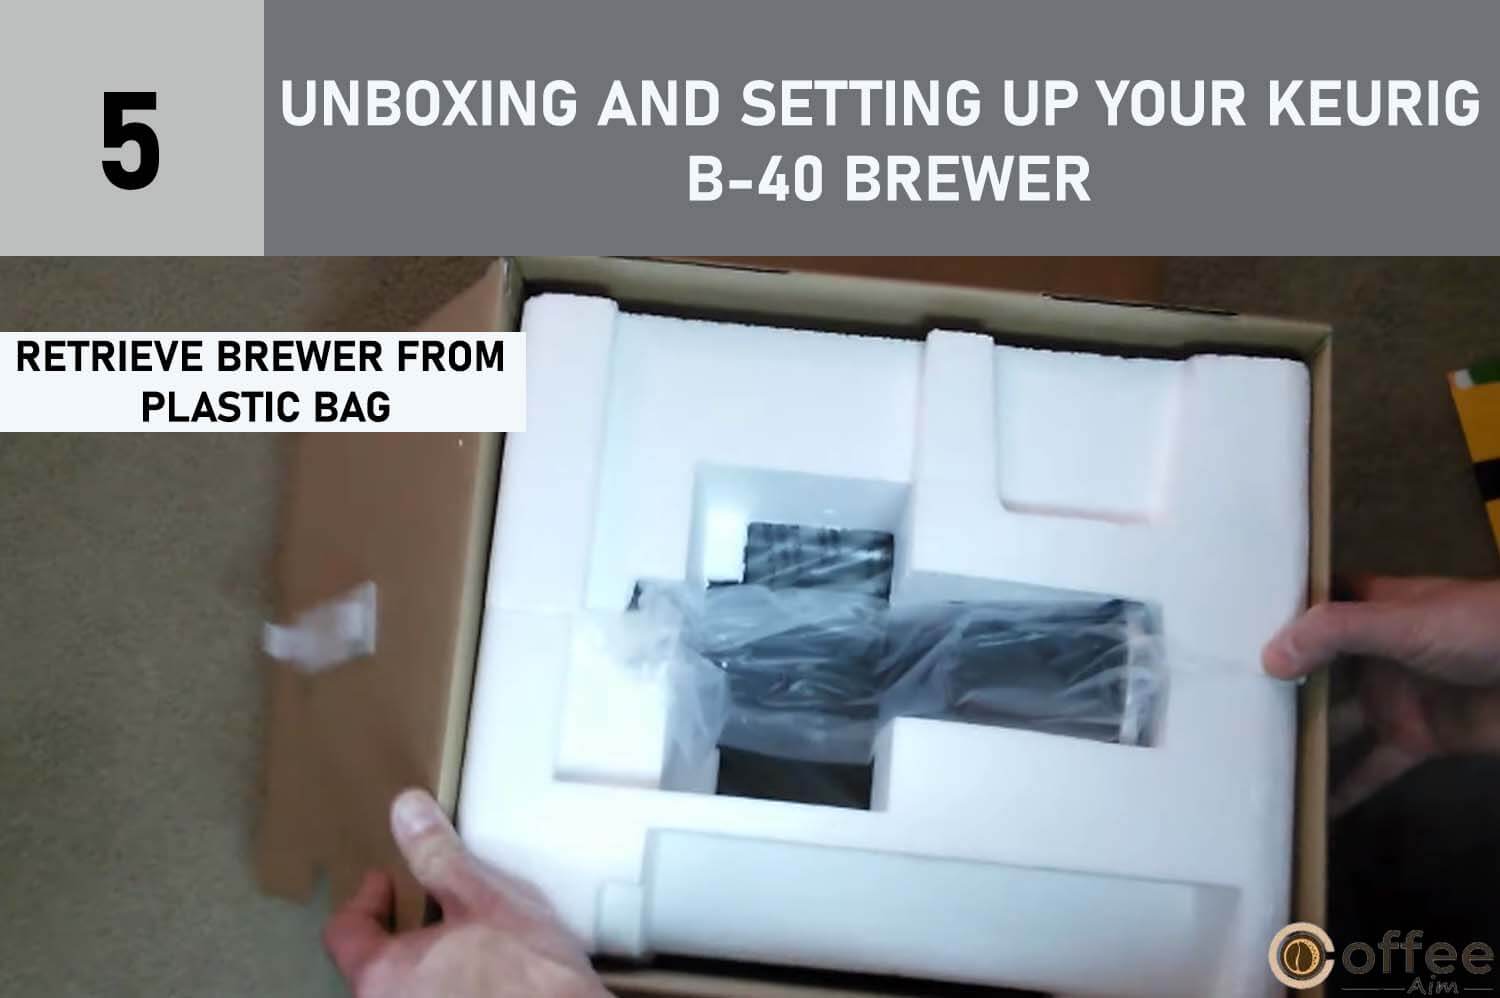 Illustrating the process of "retrieving the brewer from the protective plastic bag," this image perfectly encapsulates the initial step in the comprehensive guide titled "Unboxing and Setting Up Your Keurig B-40 Brewer.